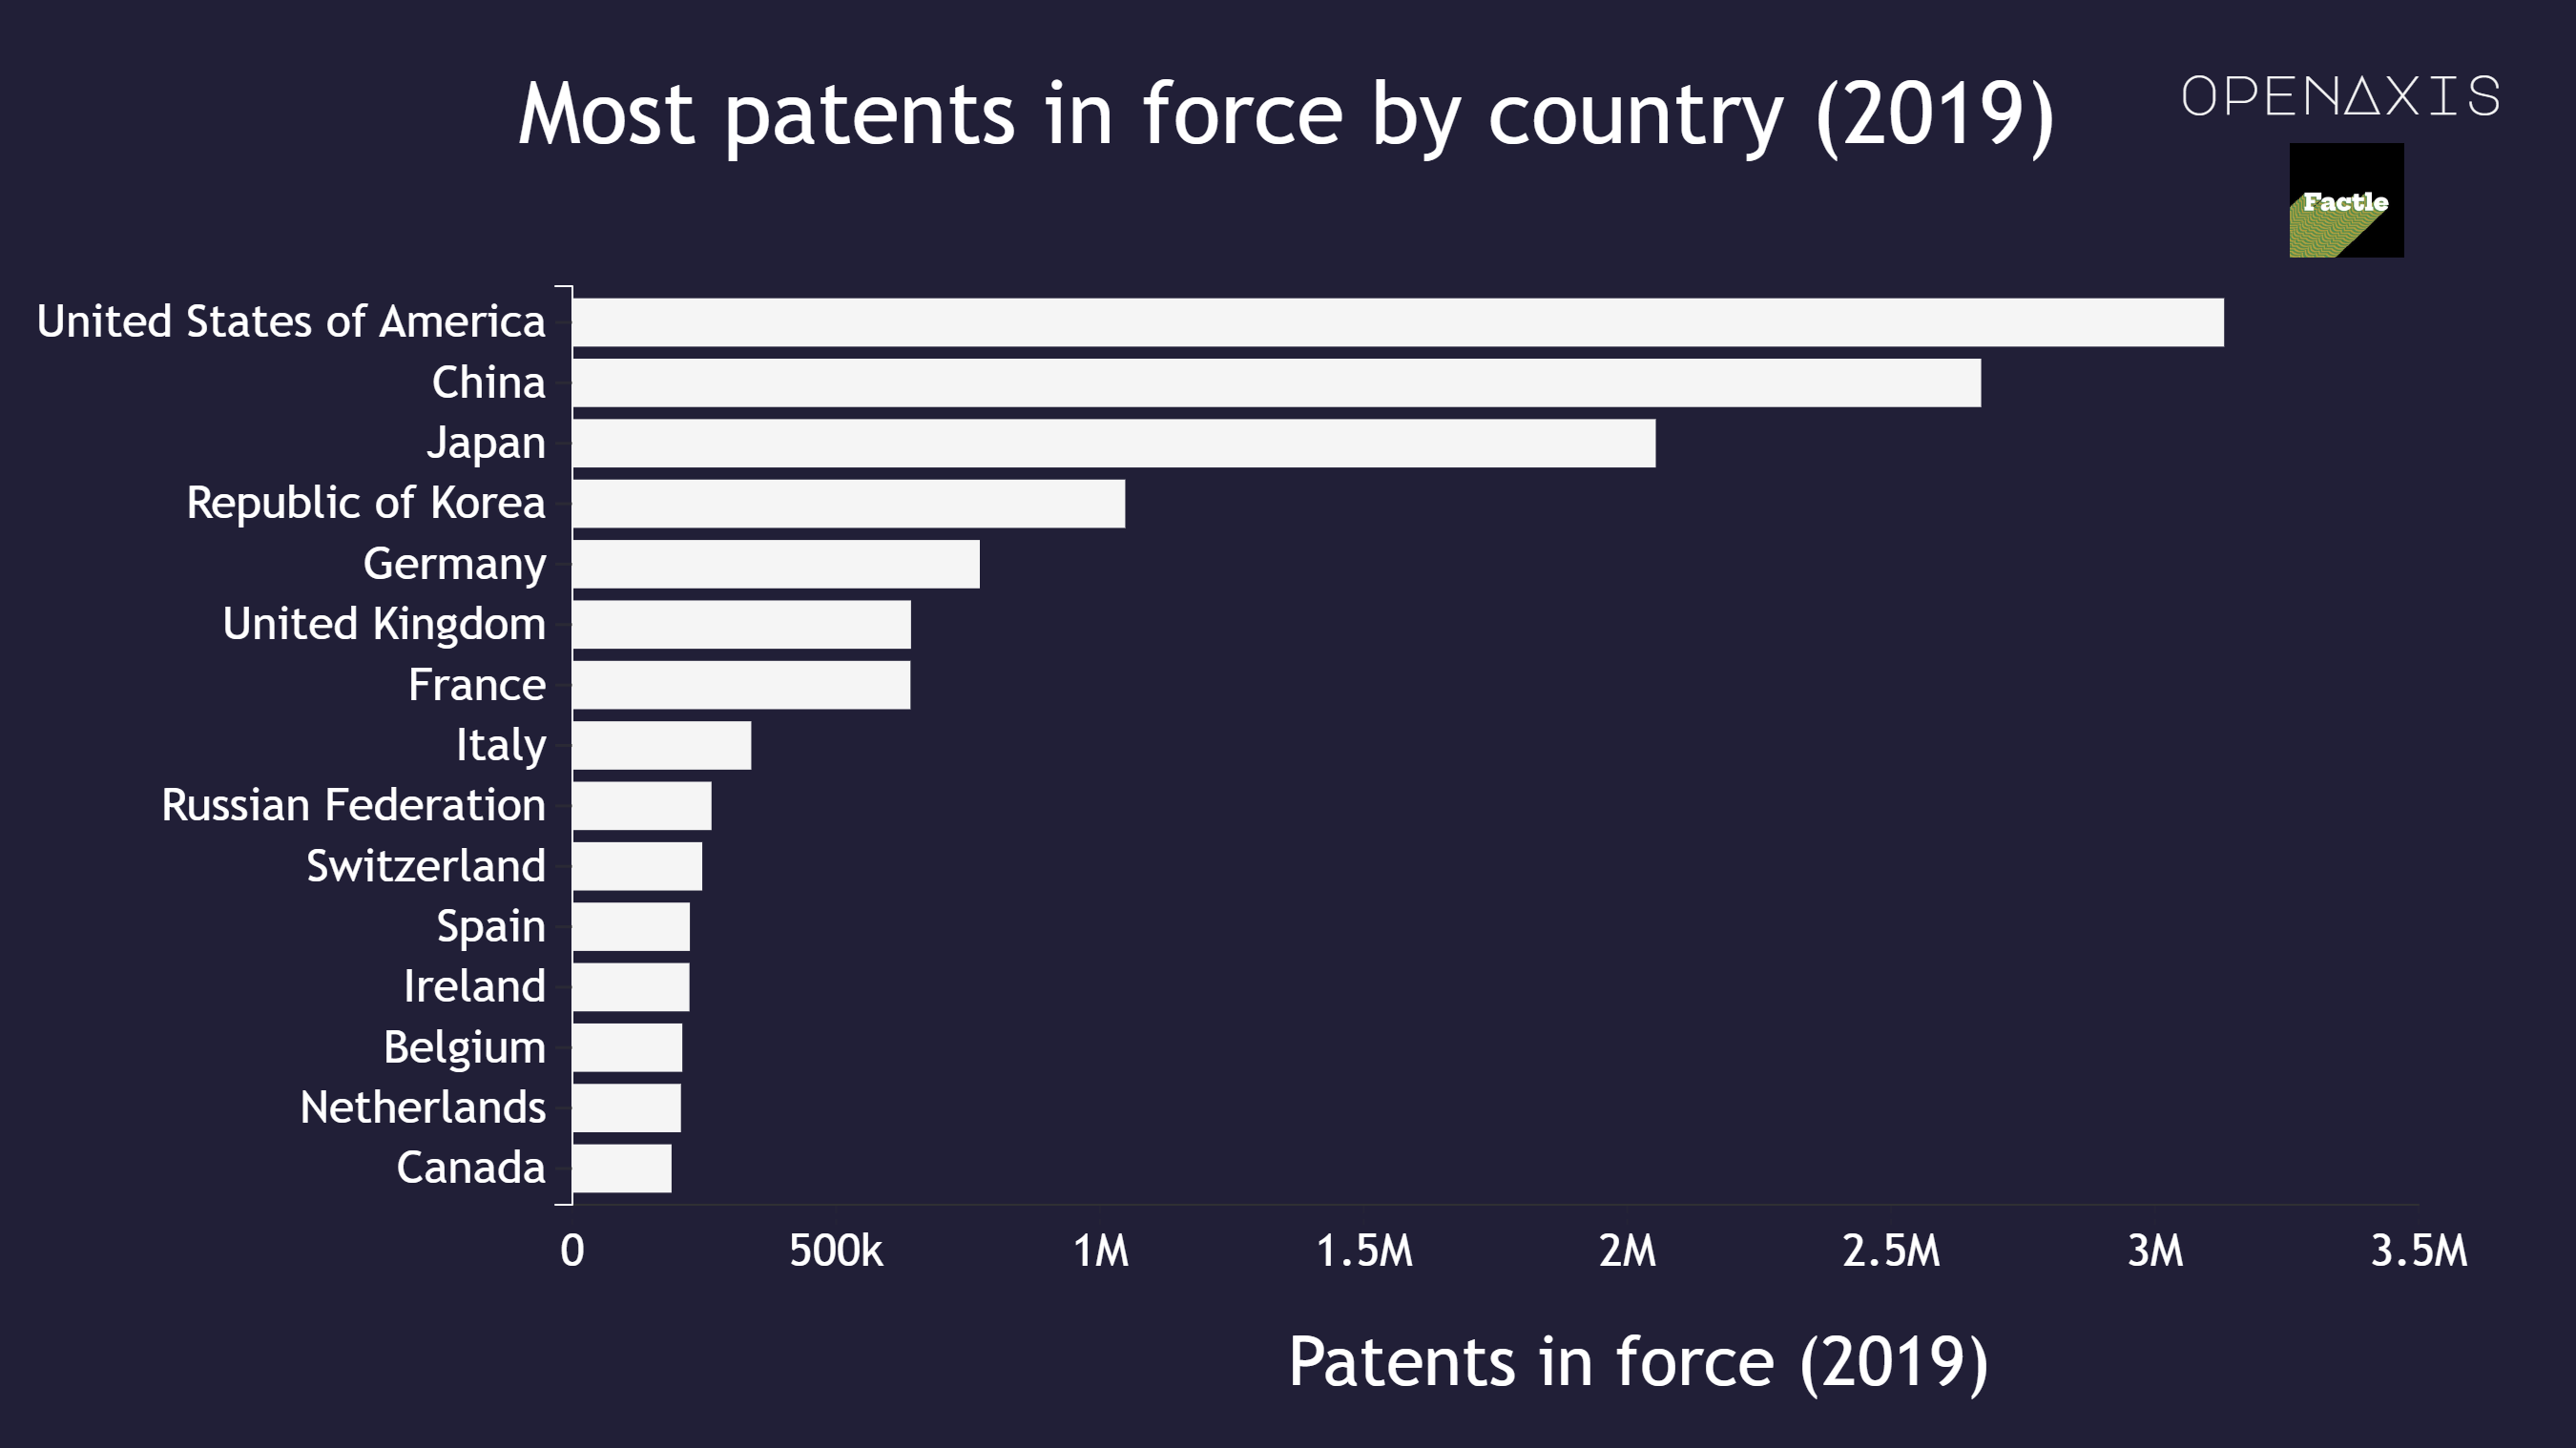 "Most patents in force by country (2019)"